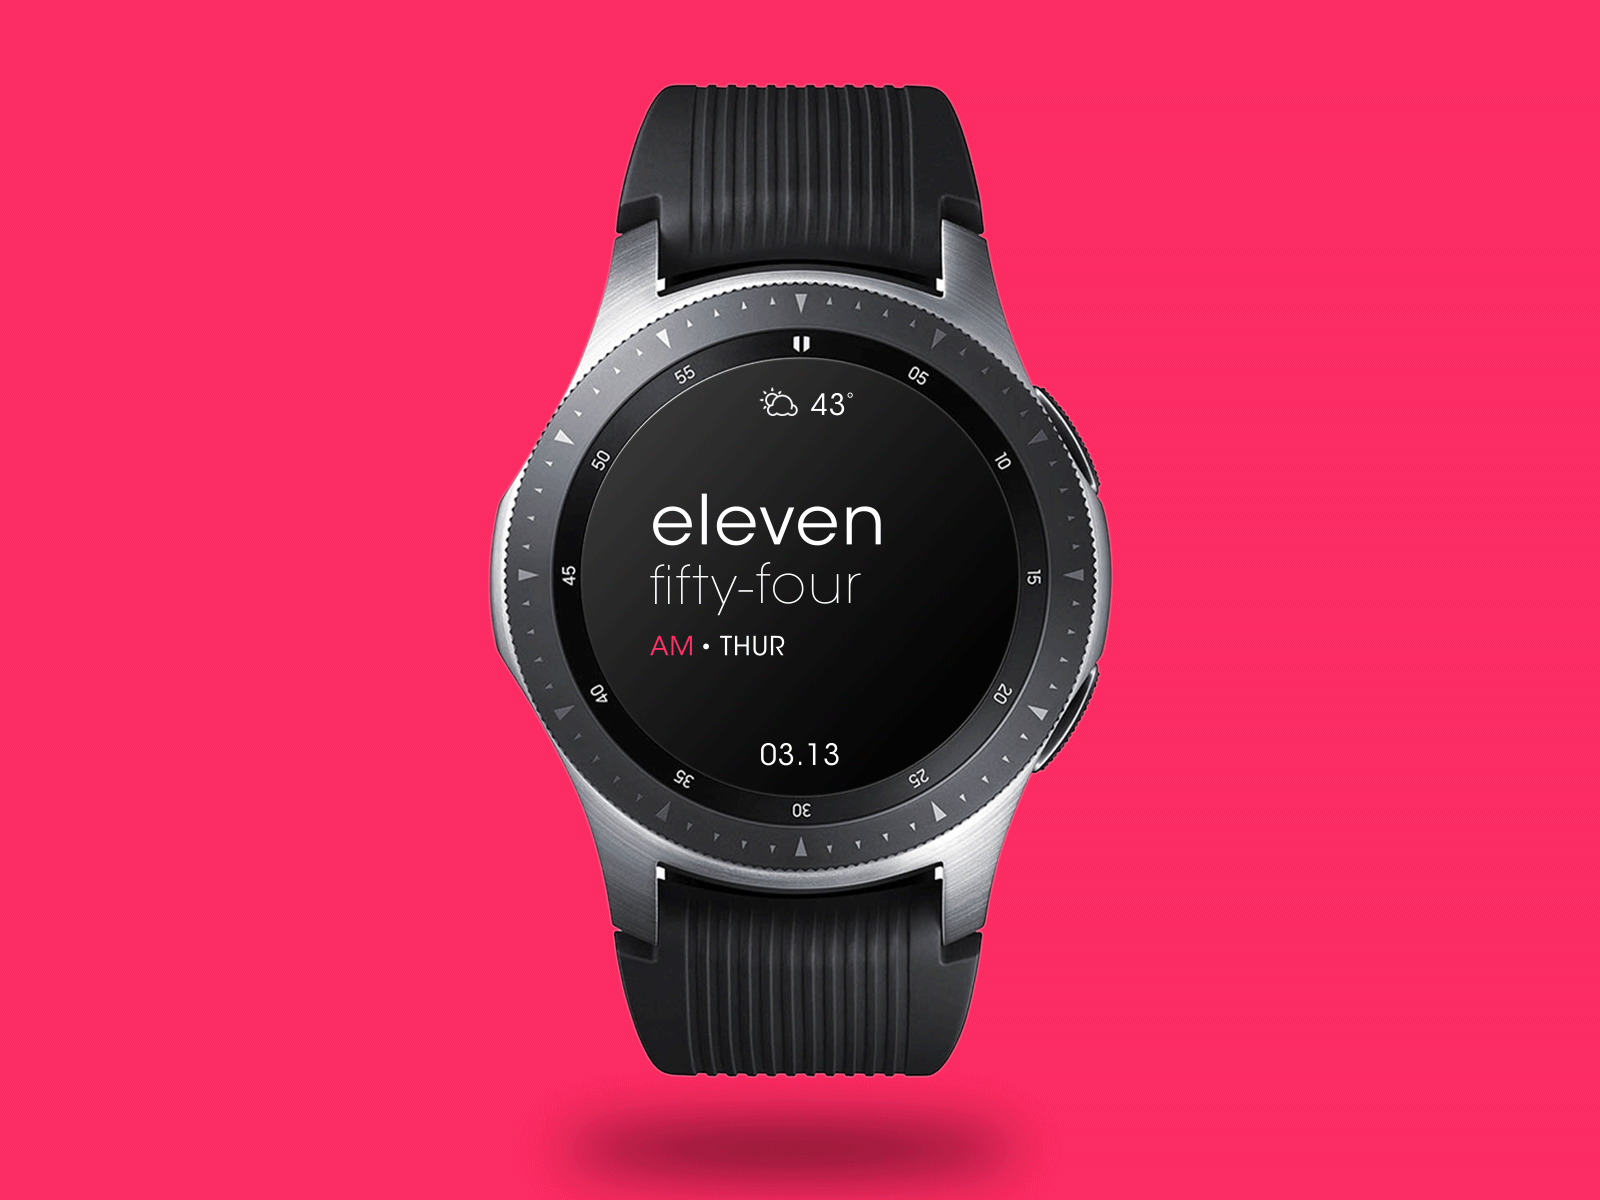 Typographic Galaxy Watch Face Animation by Won J. You Studios on Dribbble